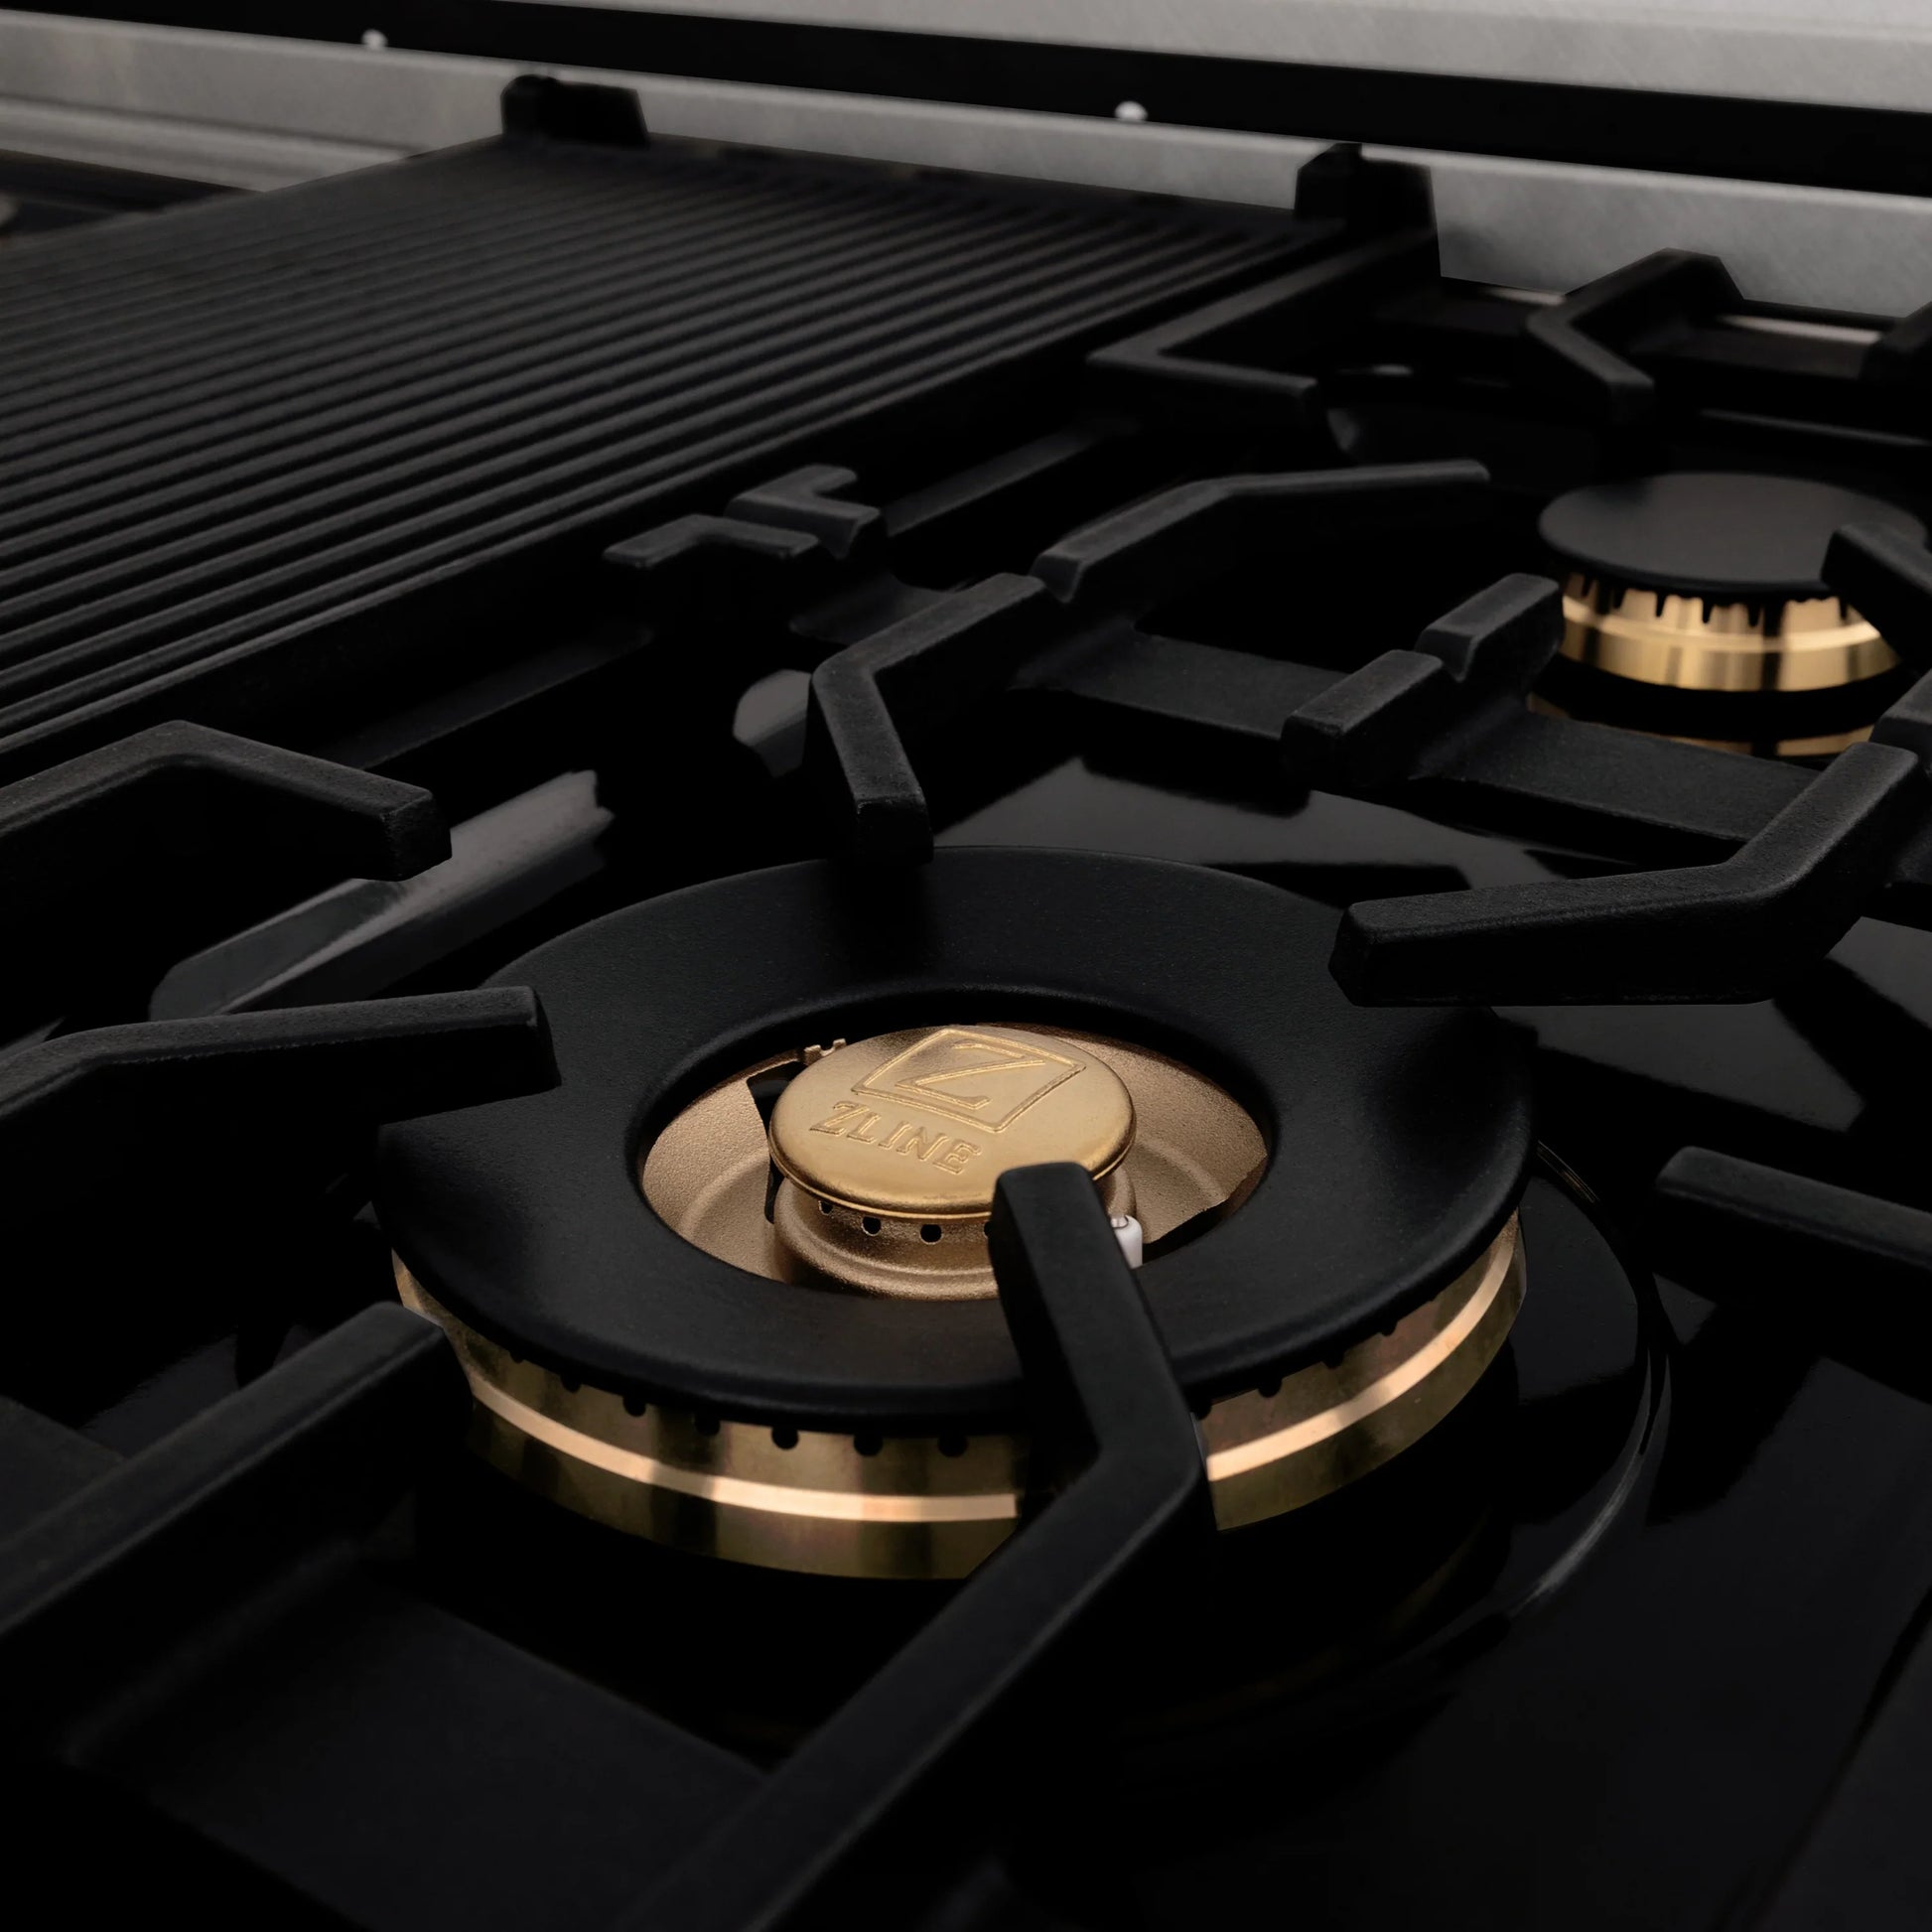 ZLINE 48" Dual Fuel Range - Gas Stove and Electric Oven, Fingerprint Resistant with Brass Burners